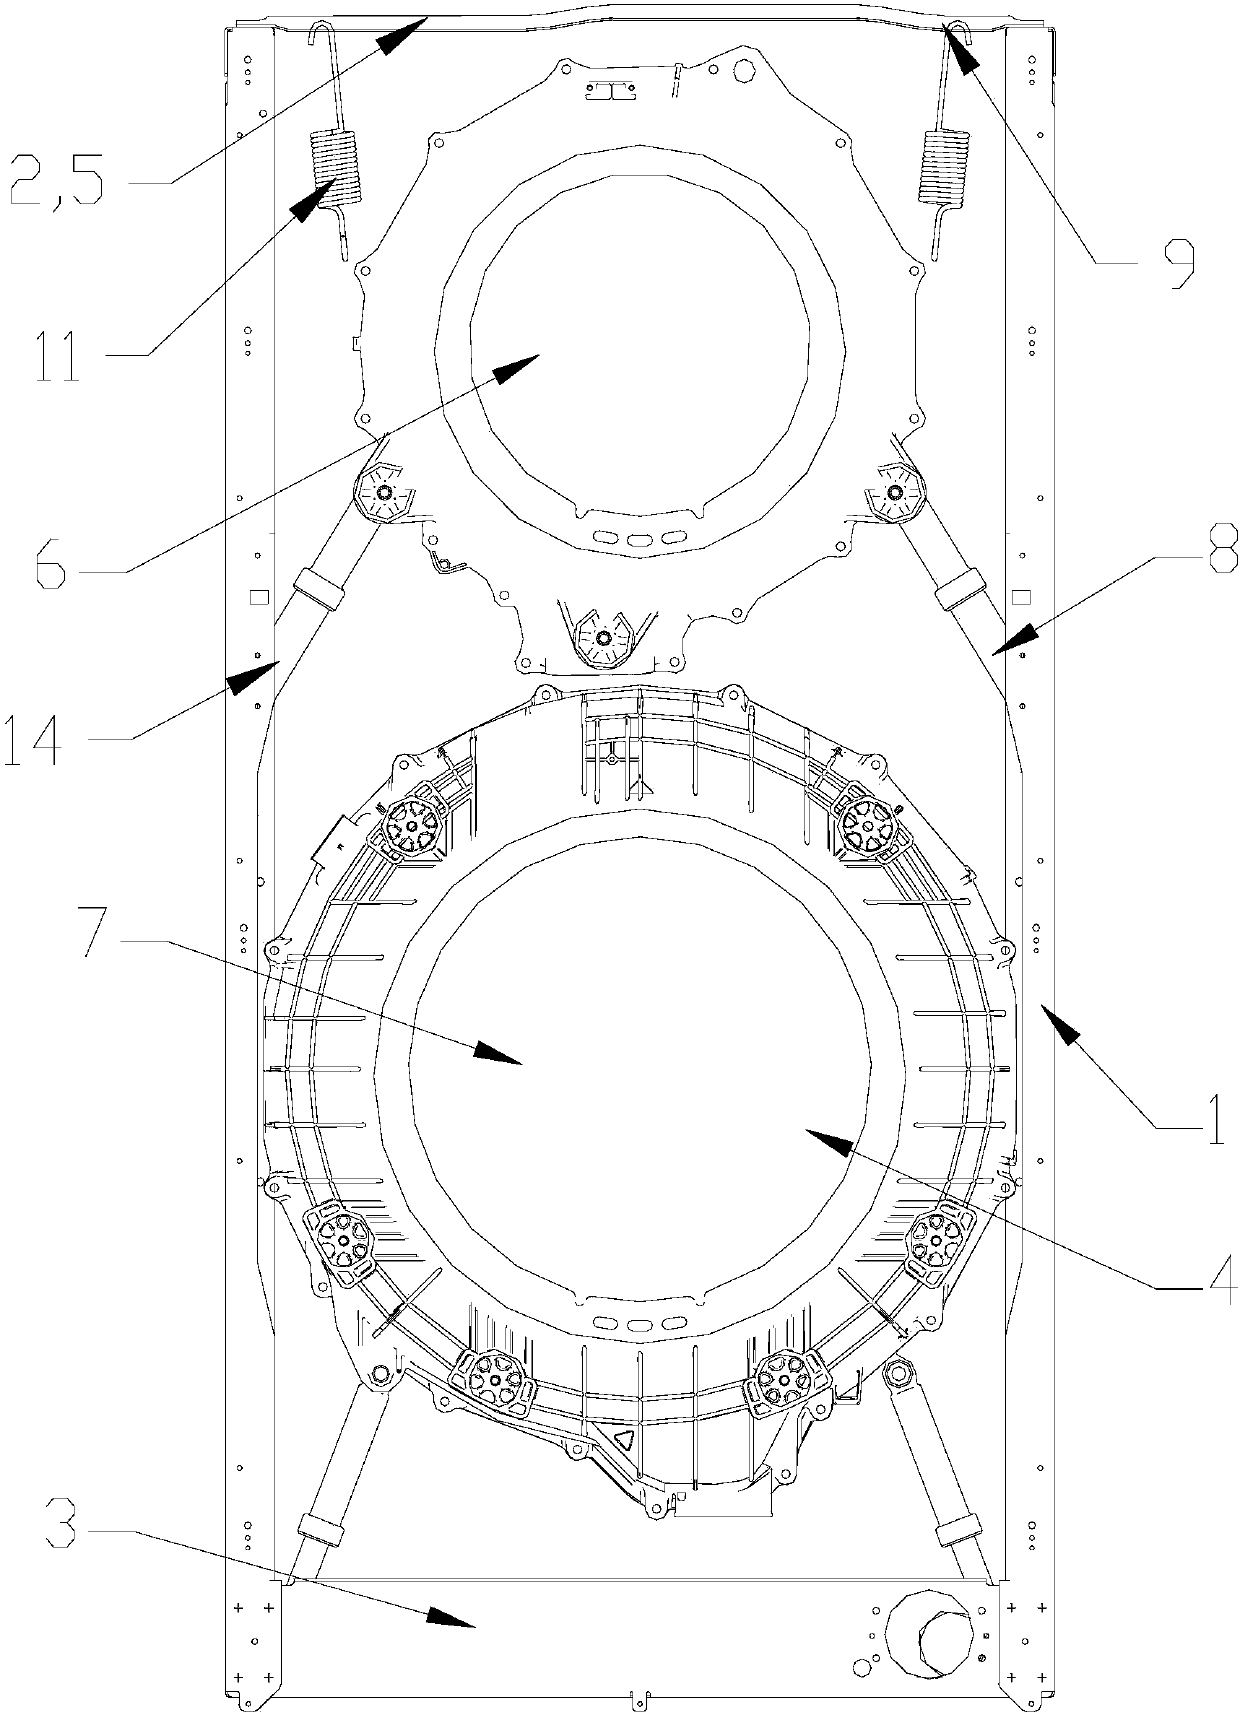 Double-drum washing machine and support frame thereof